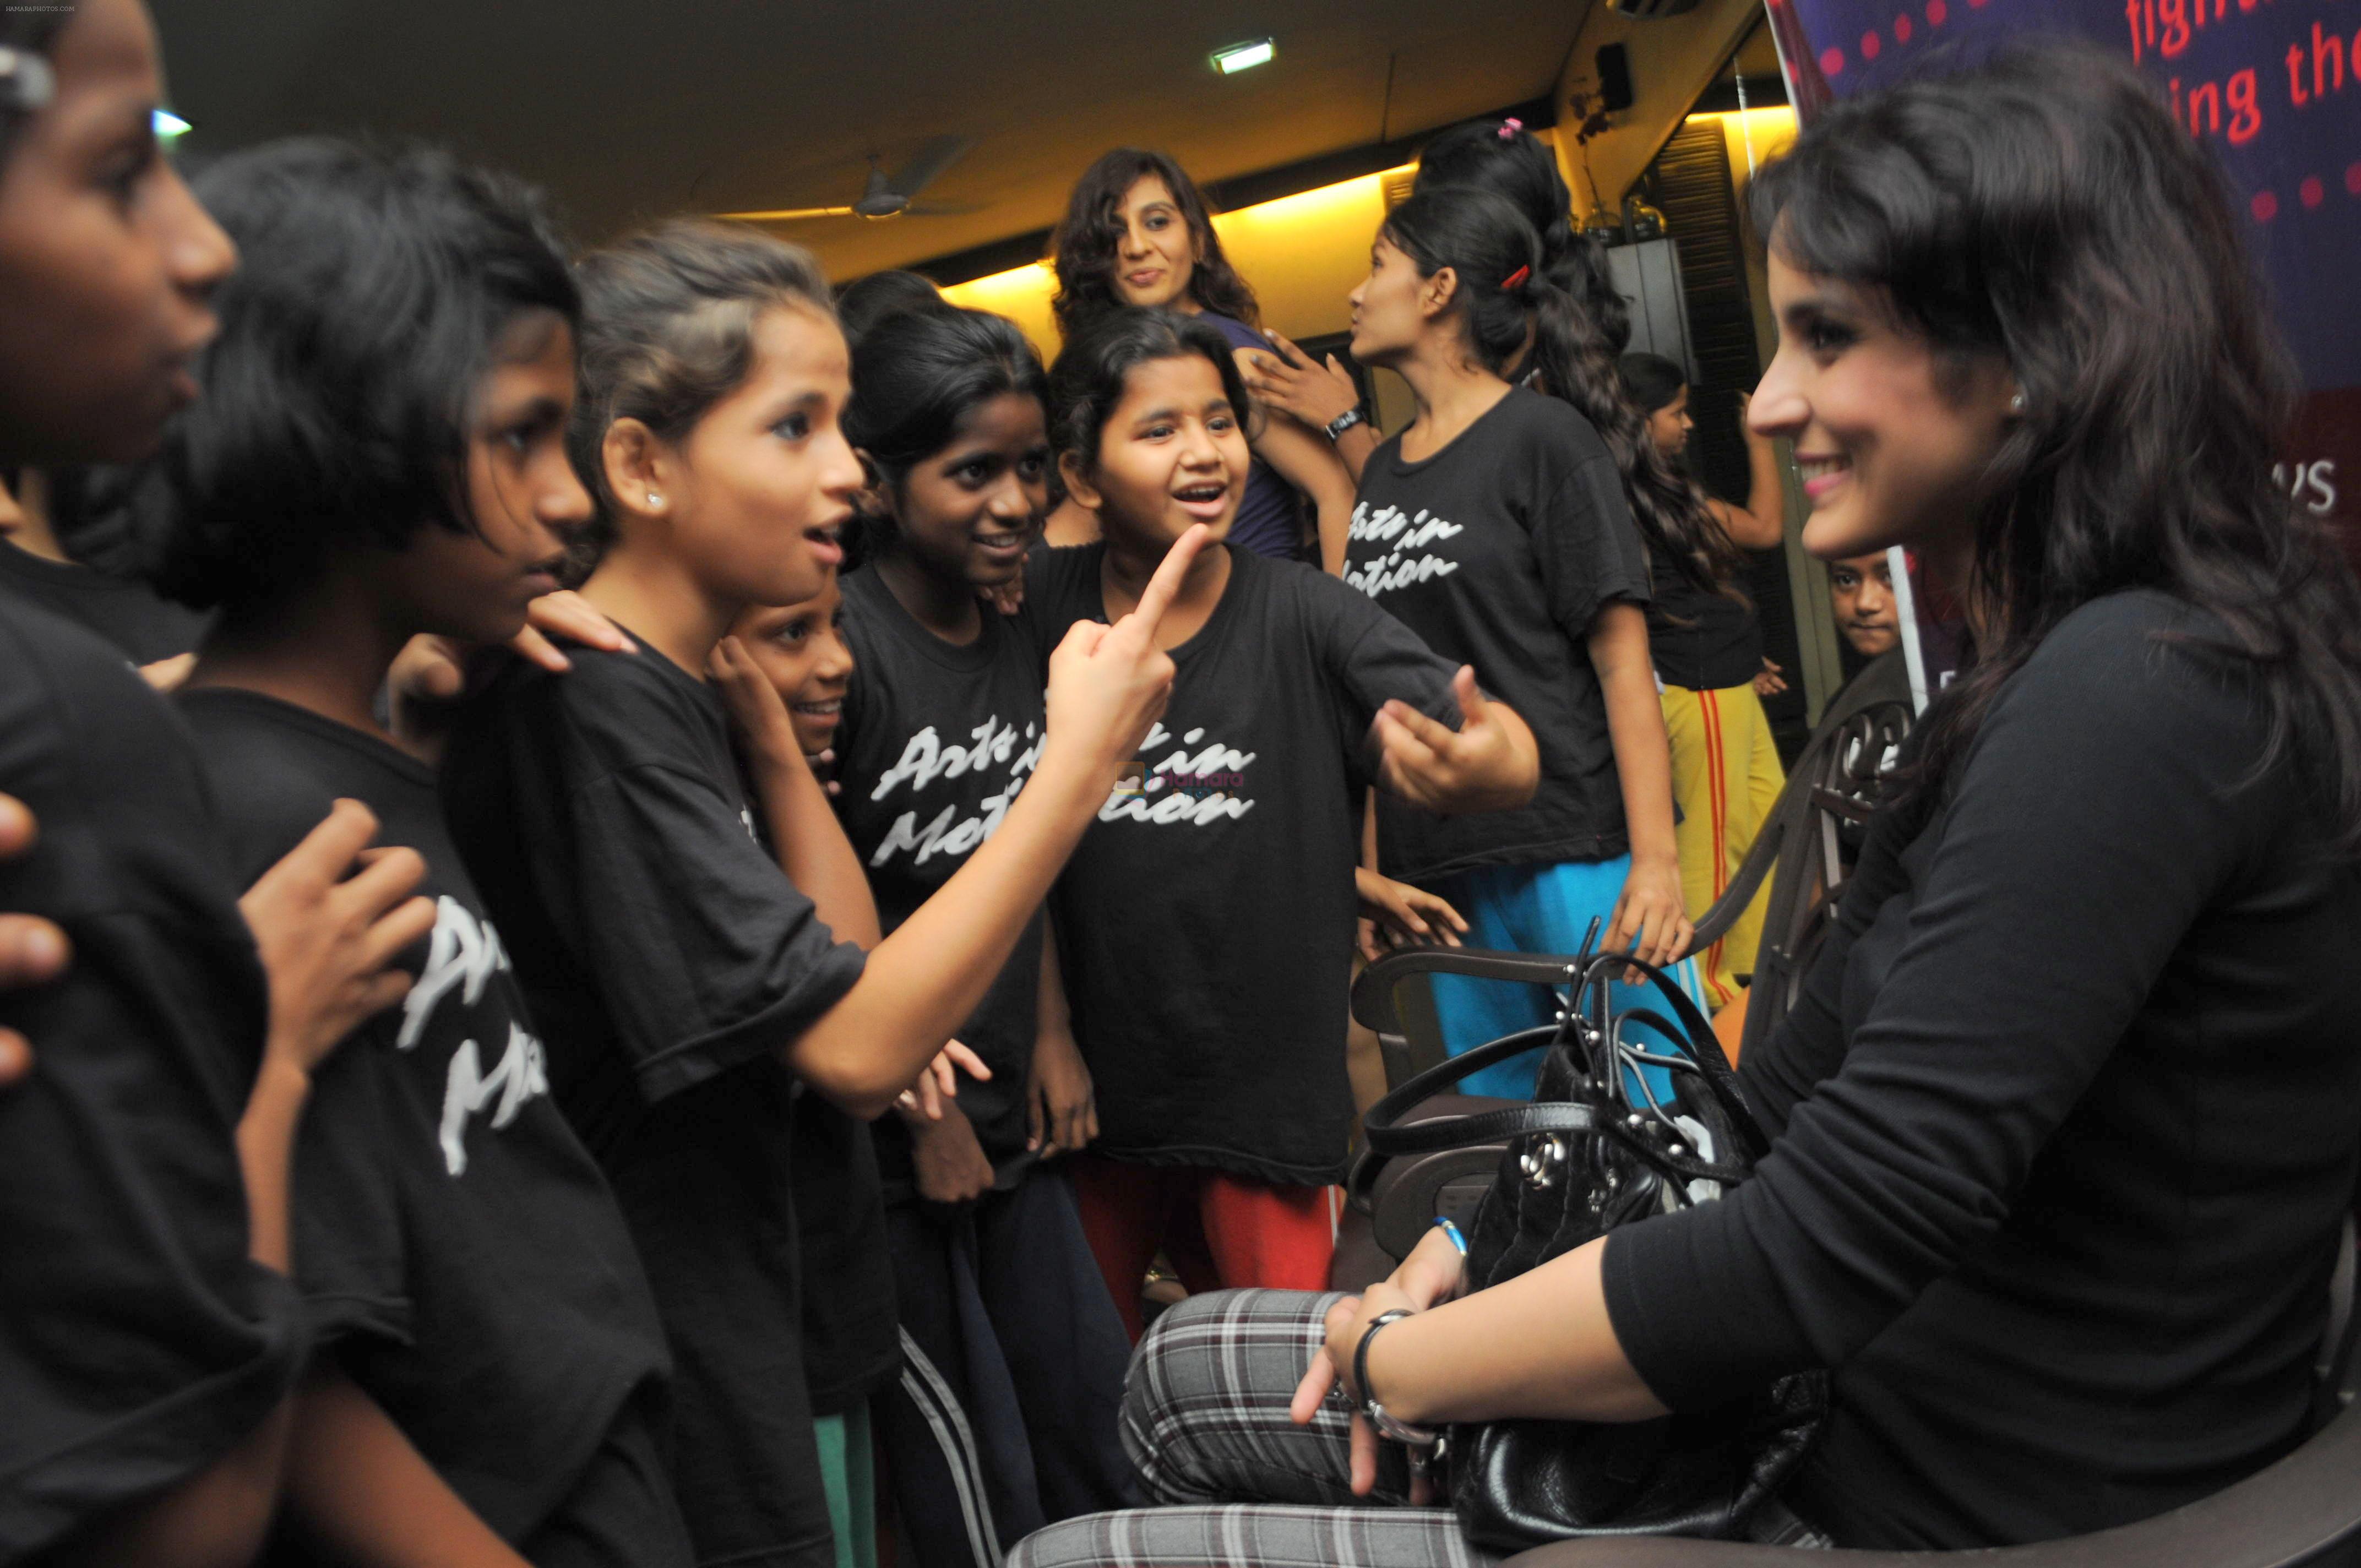 Tulip joshi meets and greets the Special girl children at Arts in motion's Dance with joy on 20th July 2012